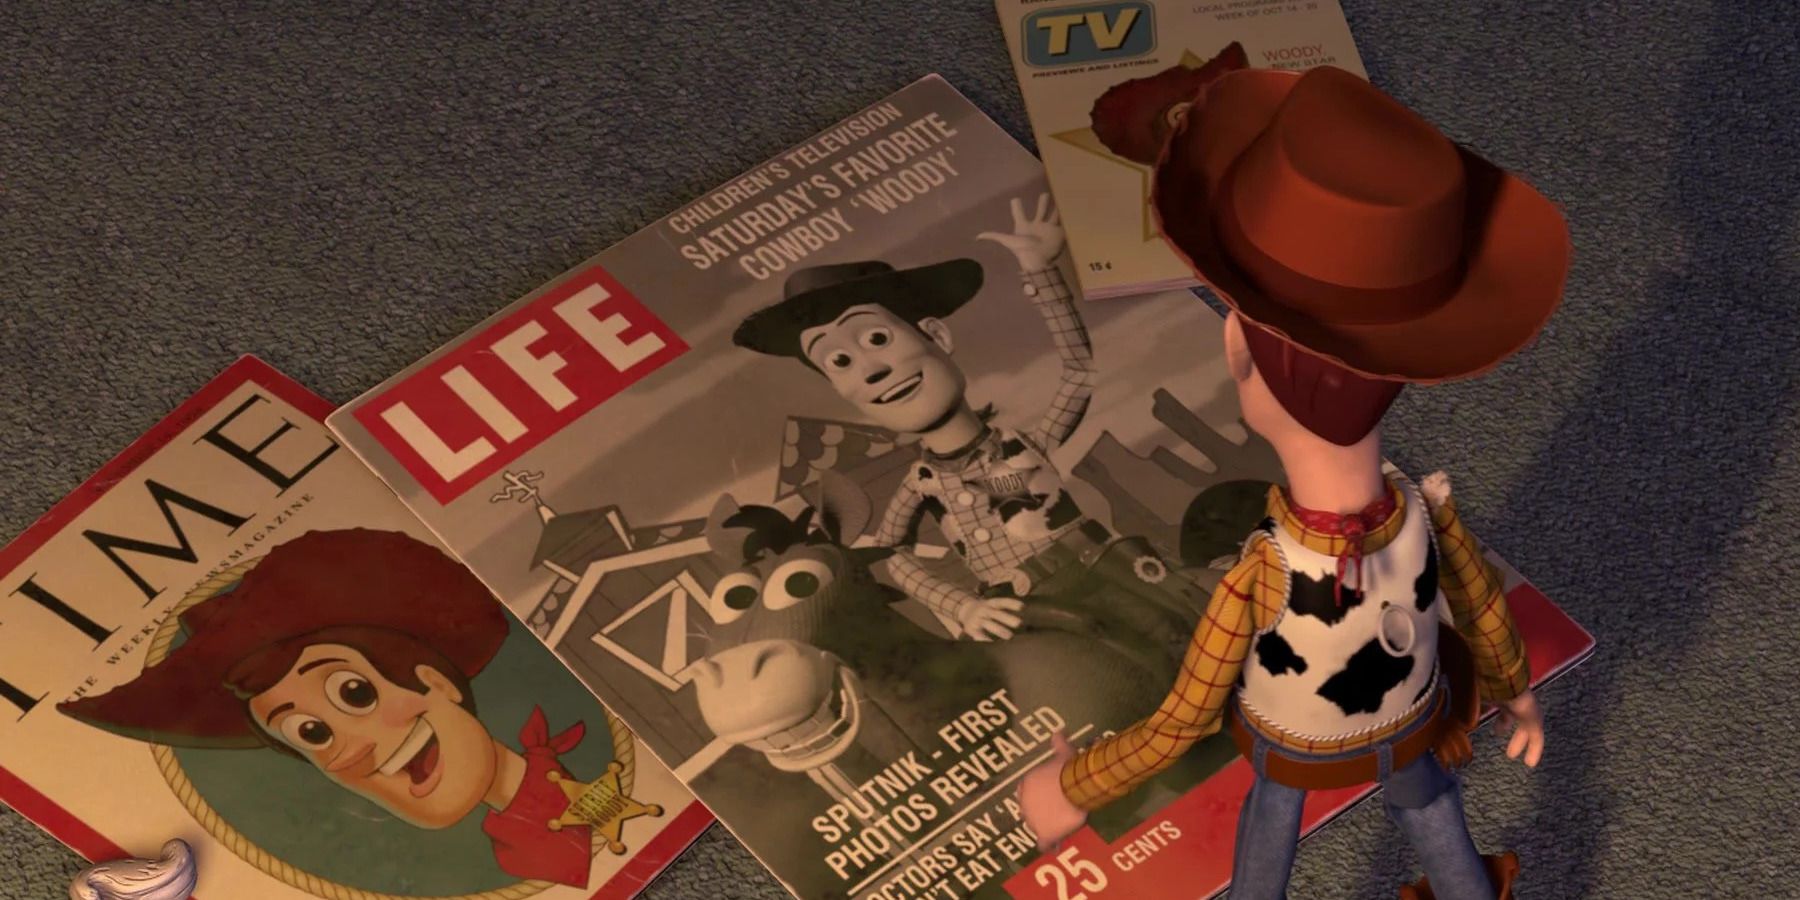 Every Song In The Toy Story Franchise Ranked Worst To Best